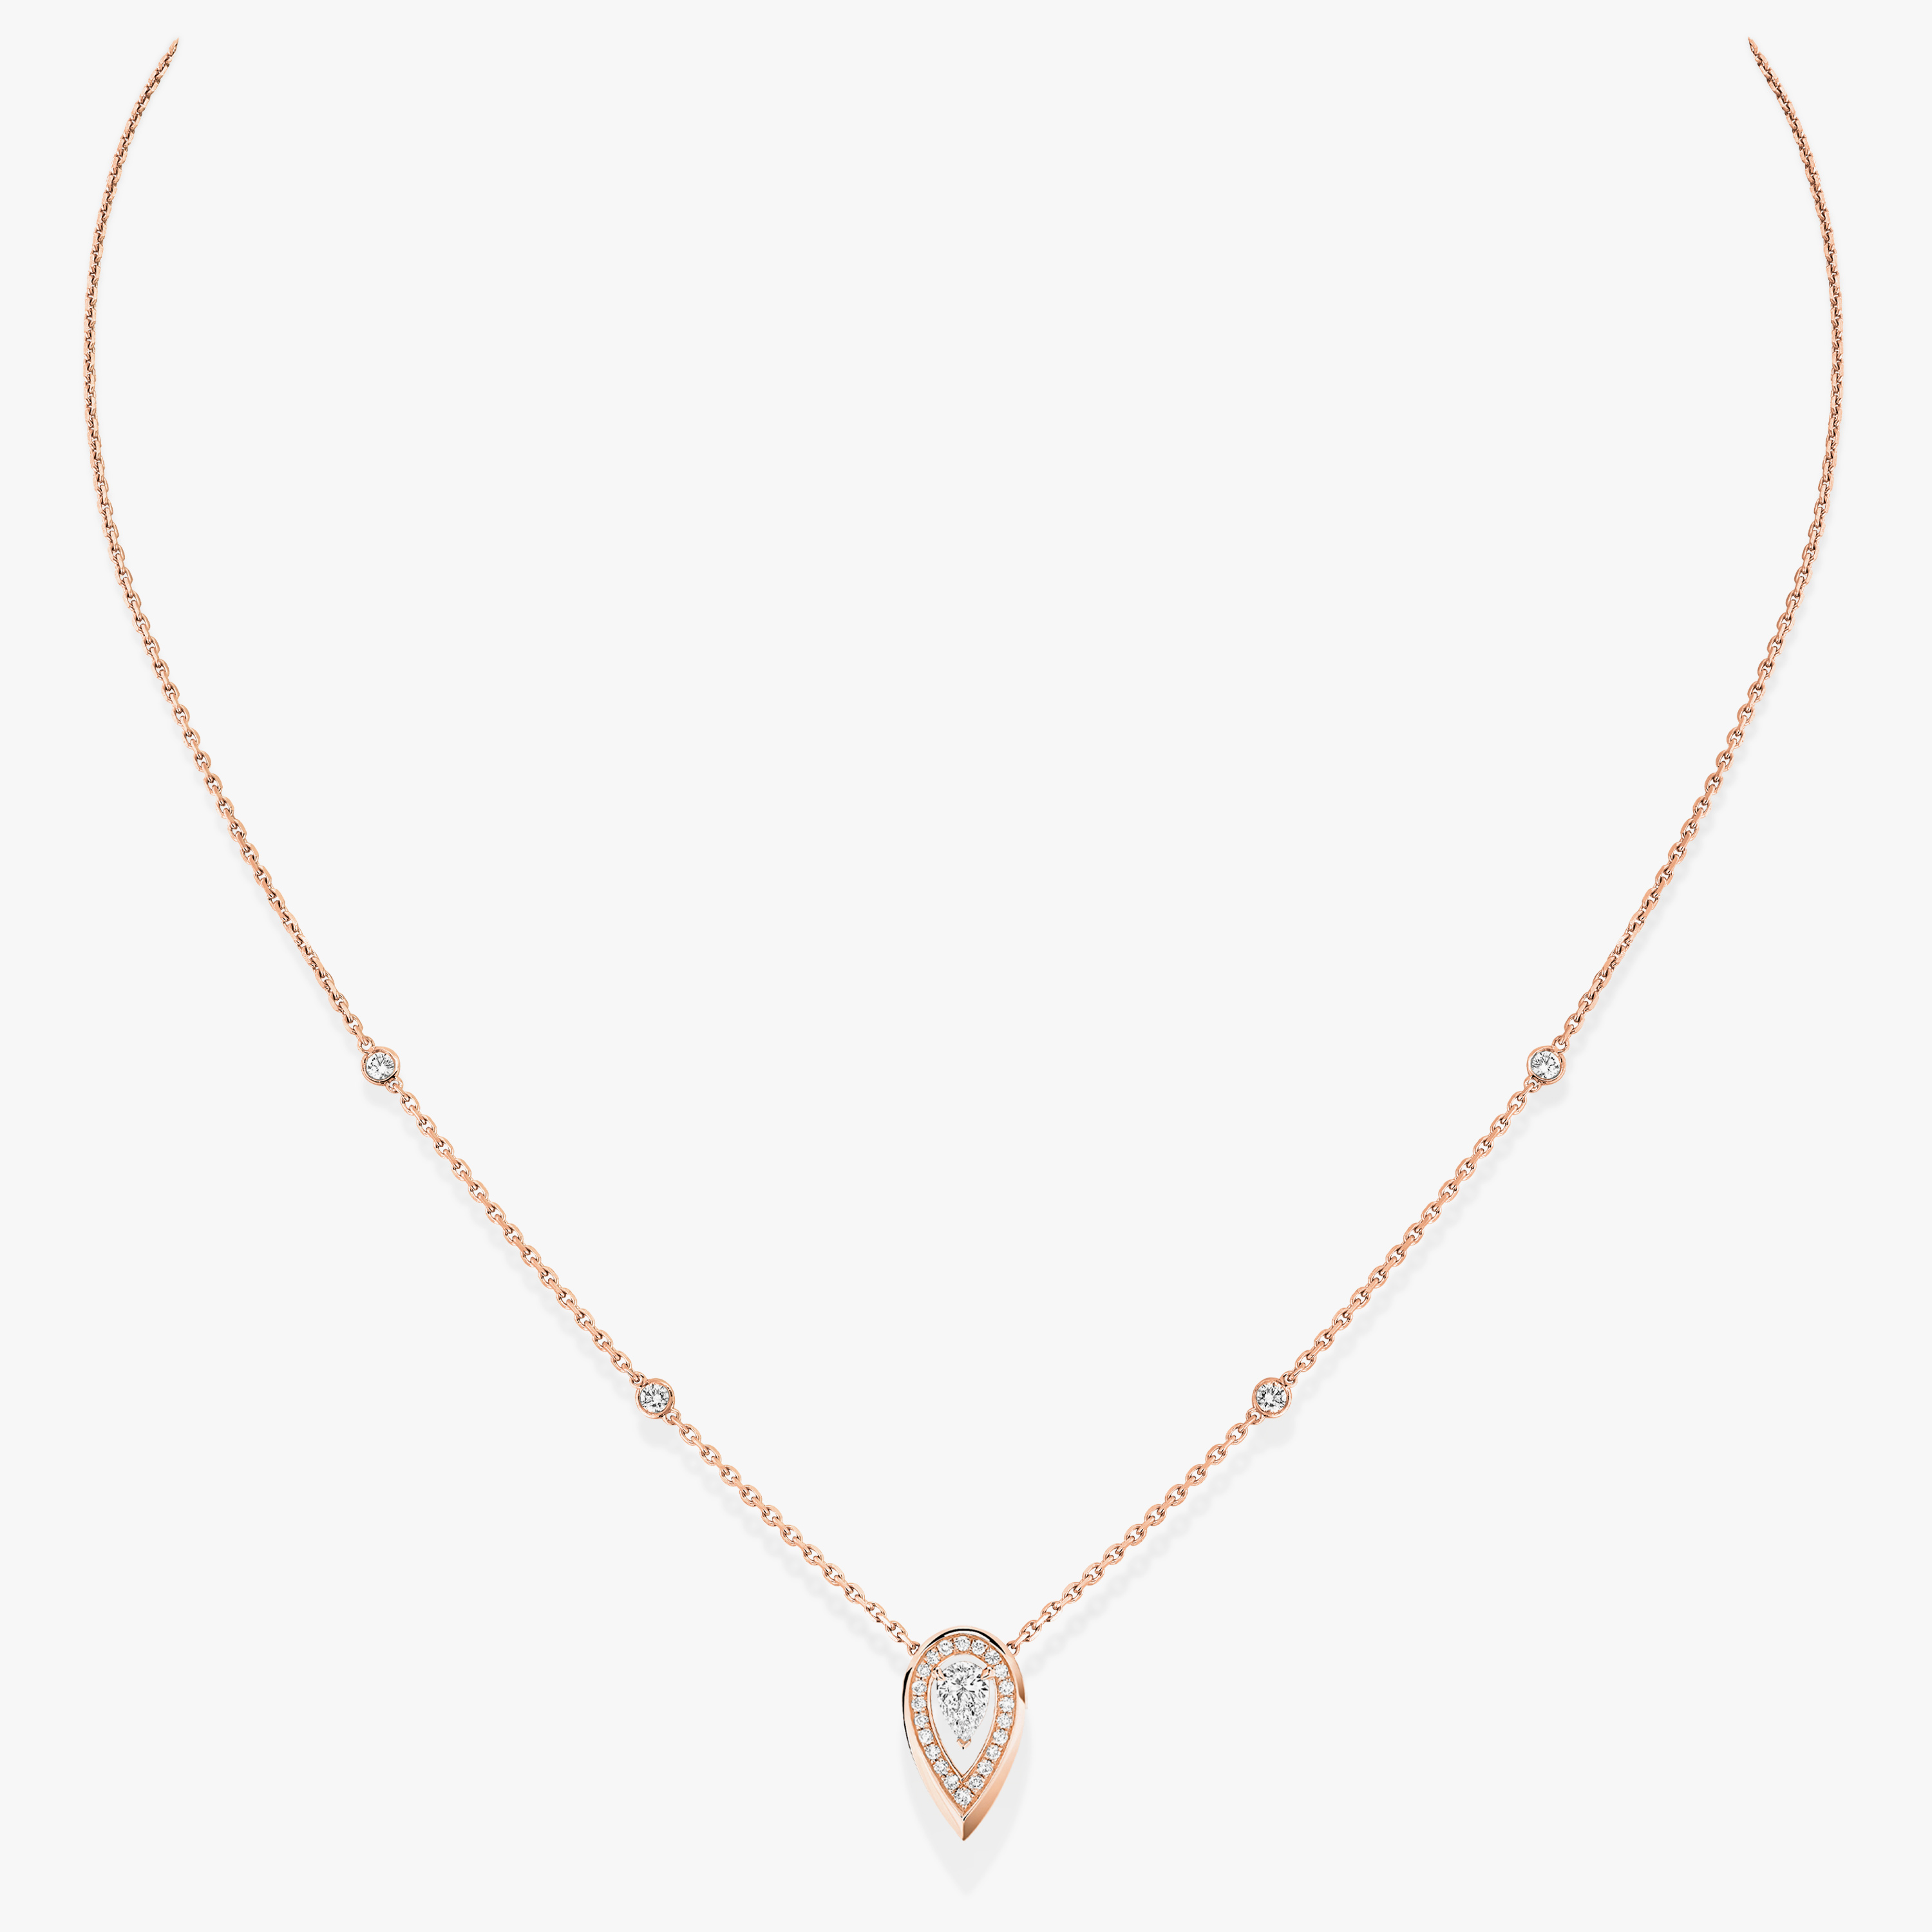 Necklace For Her Pink Gold Diamond Fiery 0.10ct 12611-PG